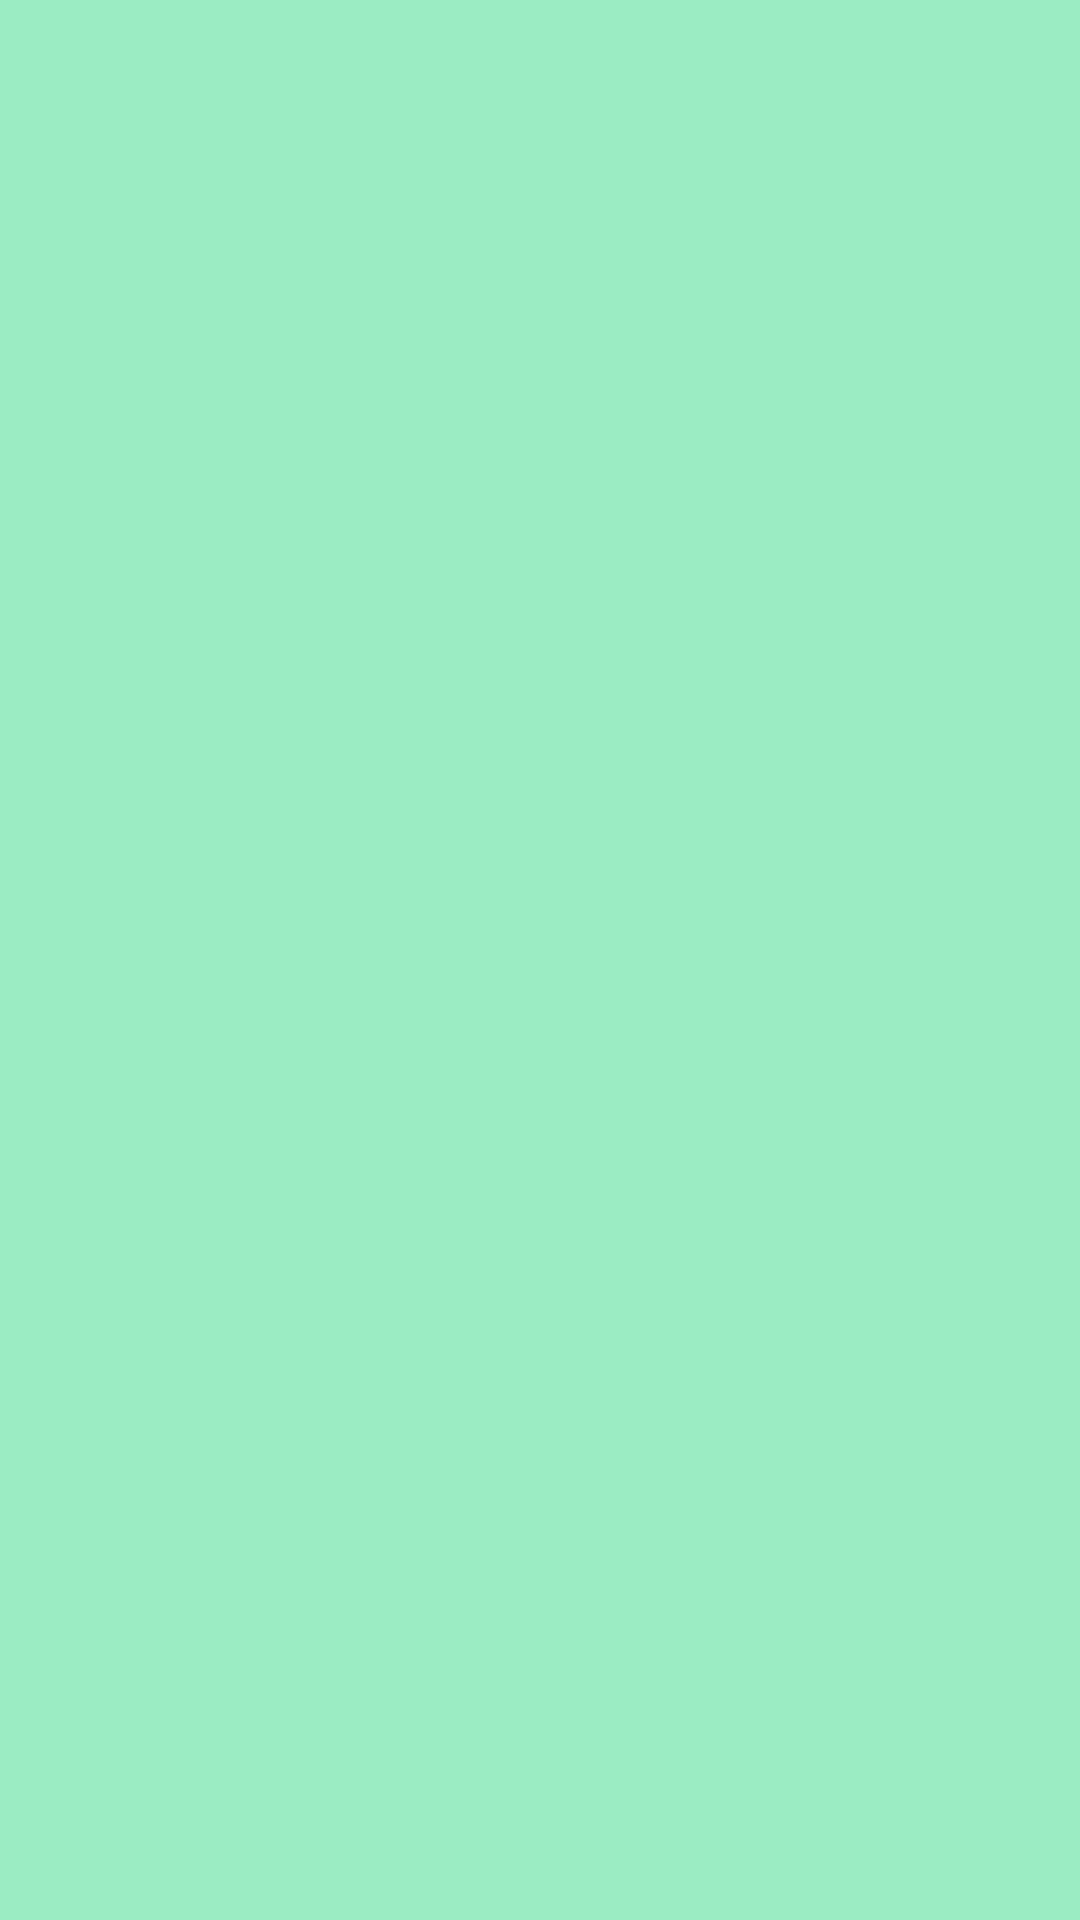 Plain And Simple Mint Green Iphone Wallpaper